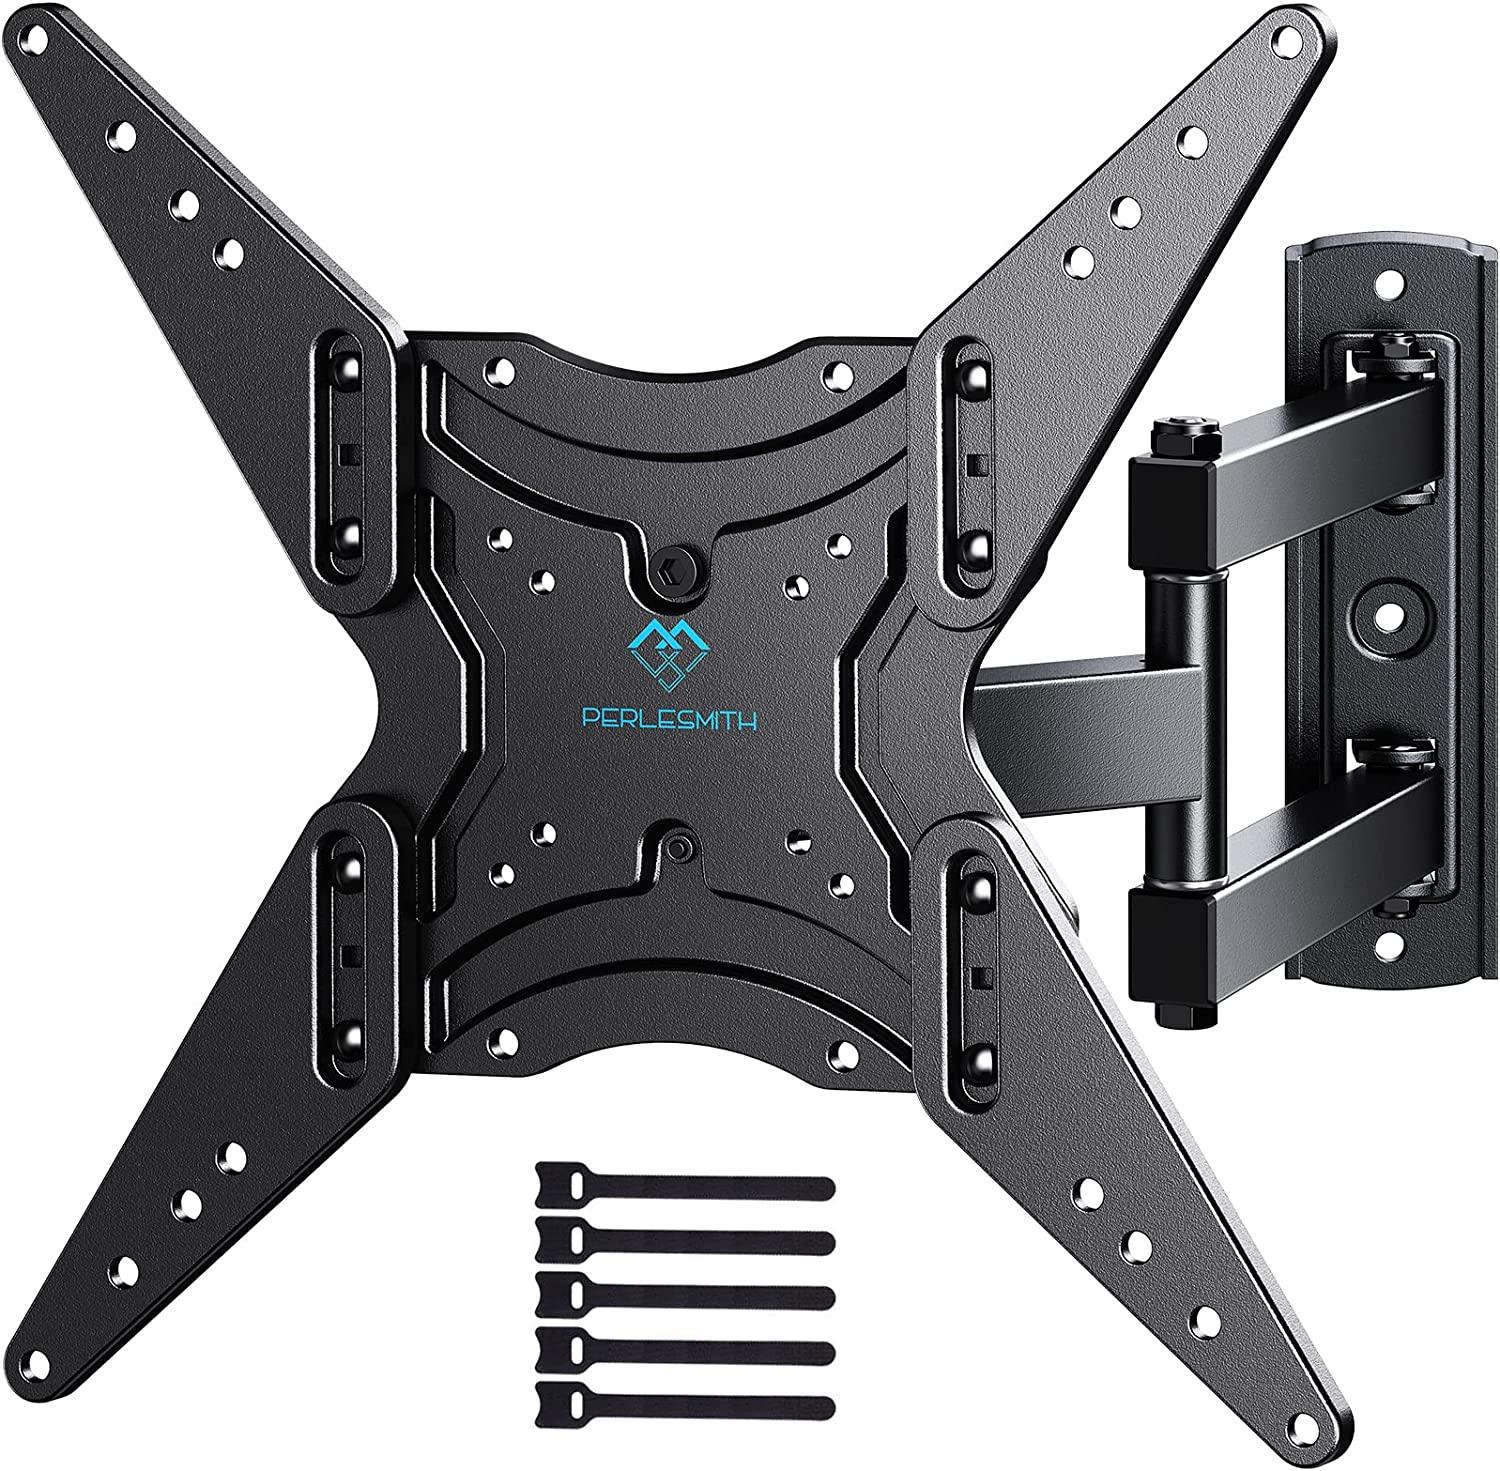 Full Motion TV Wall Mount for 26-55 Inch TVs for $12.91 Shipped